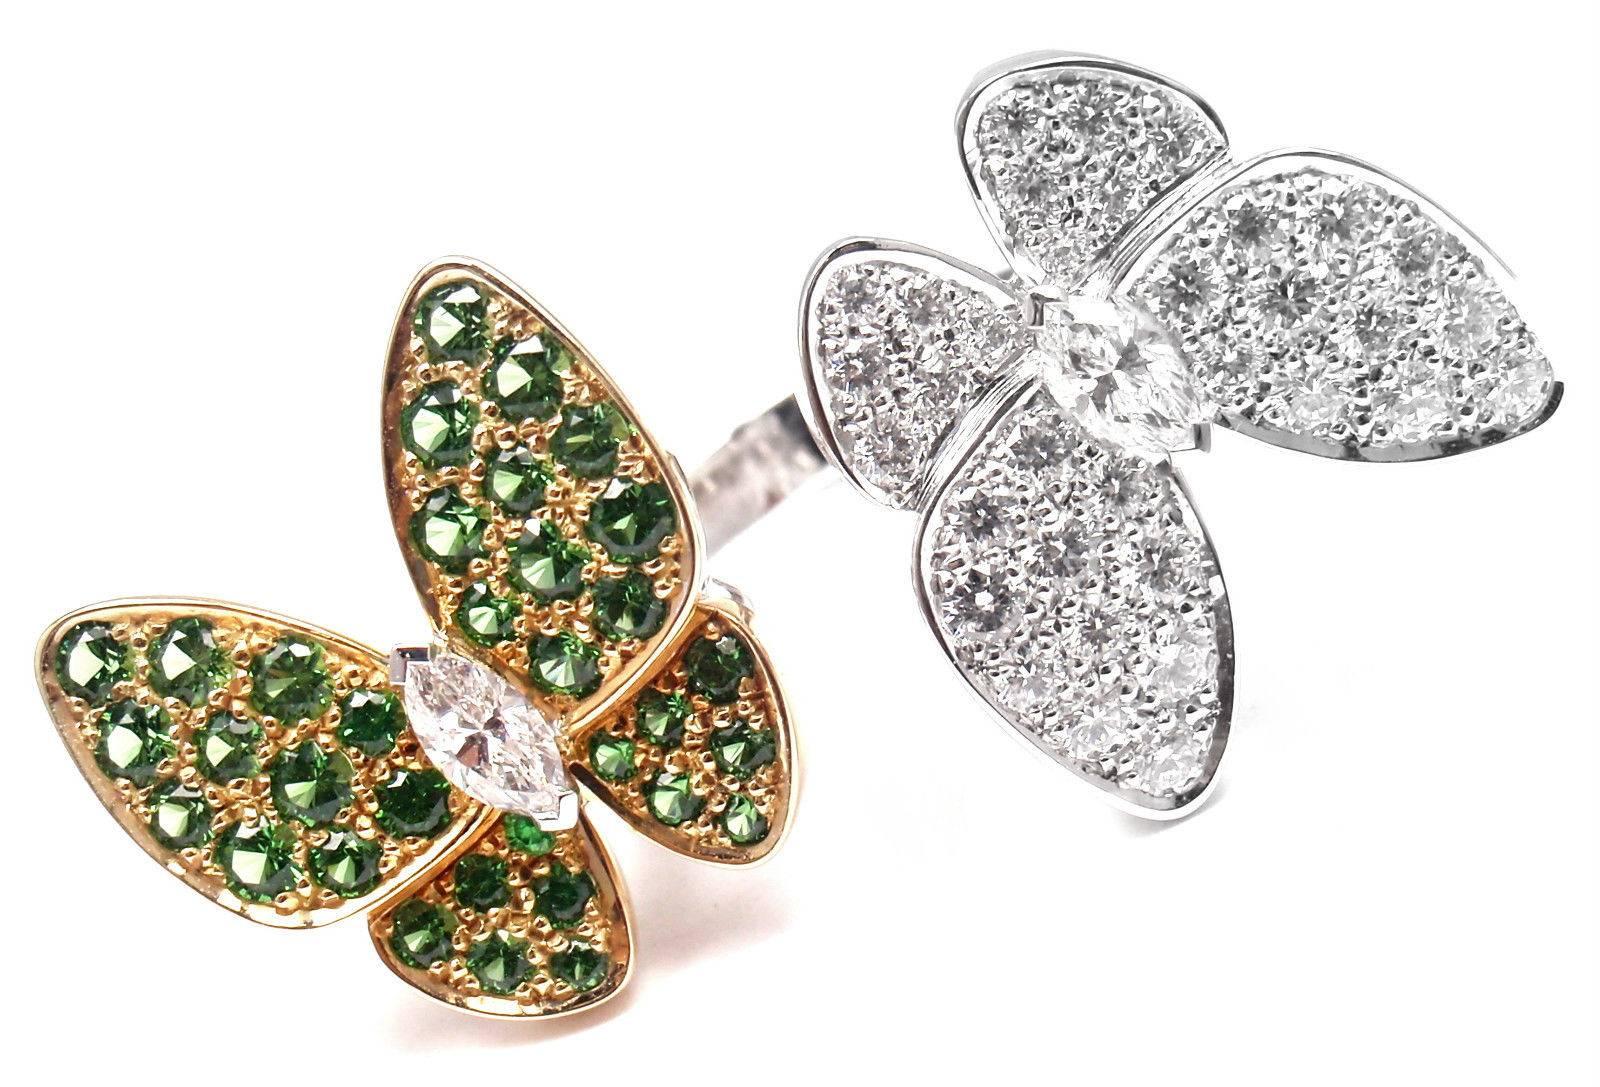 18k White Gold Diamond And Tsavorite Two Butterfly Between the Finger Ring by Van Cleef & Arpels.
With 36 round brilliant cut diamonds VVS1 clarity, E color total weight approx. .99ct
34 round sapphires 1.23ct
This ring comes with Van Cleef & Arpels